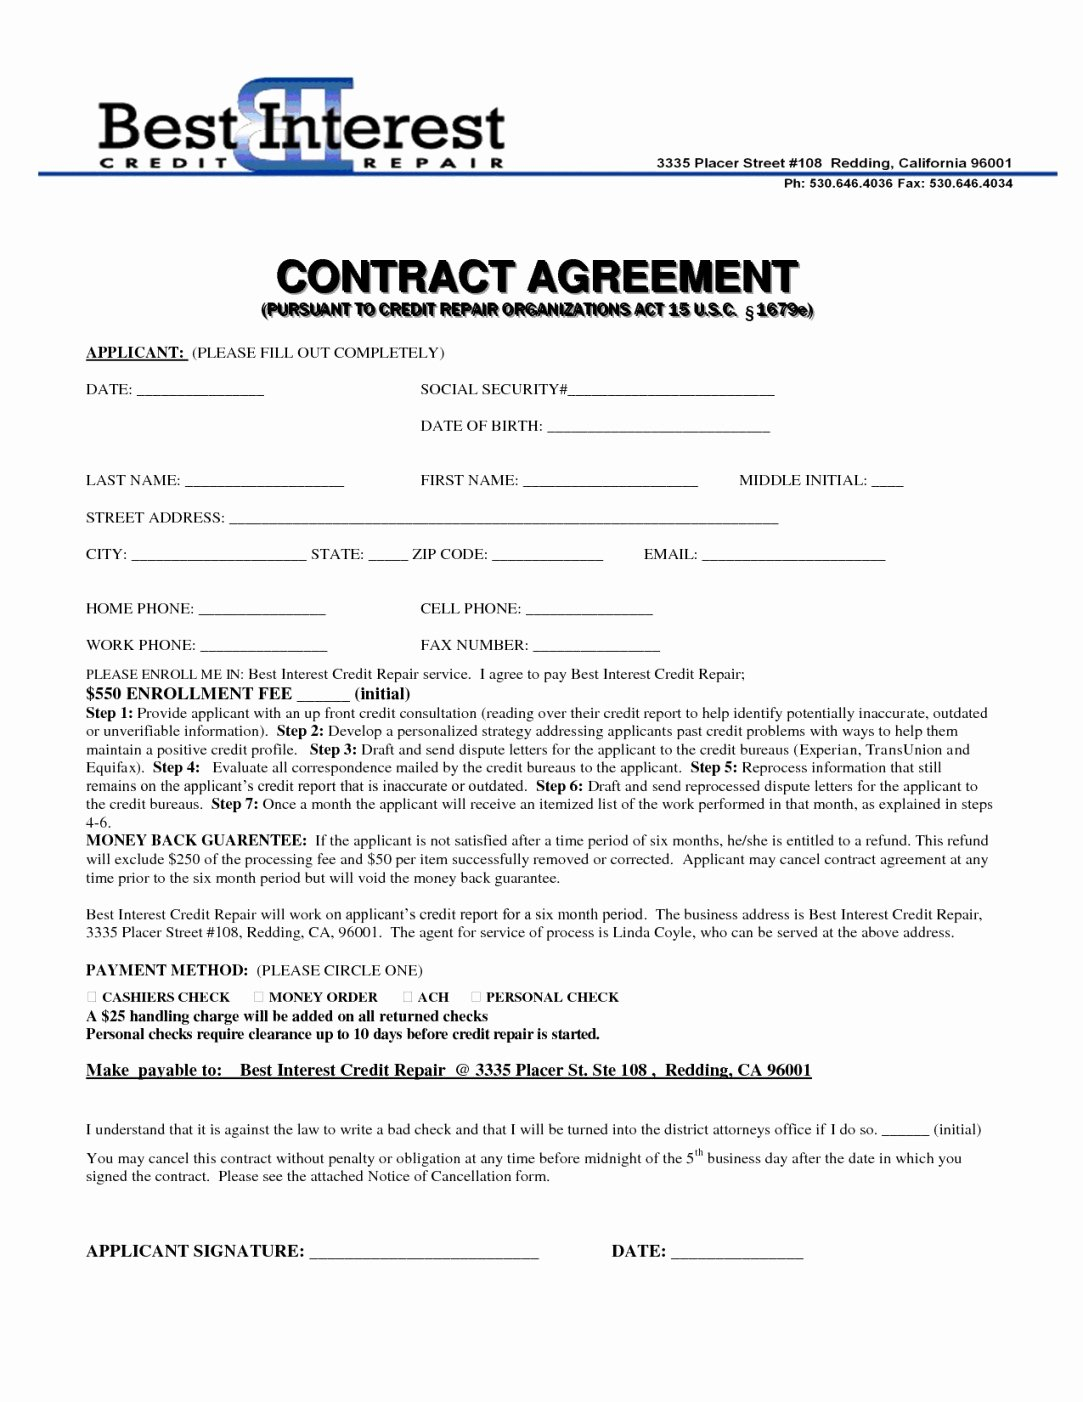 Online Marketing Agreement Digital Marketing Contract Template Unique Marketing Agreement